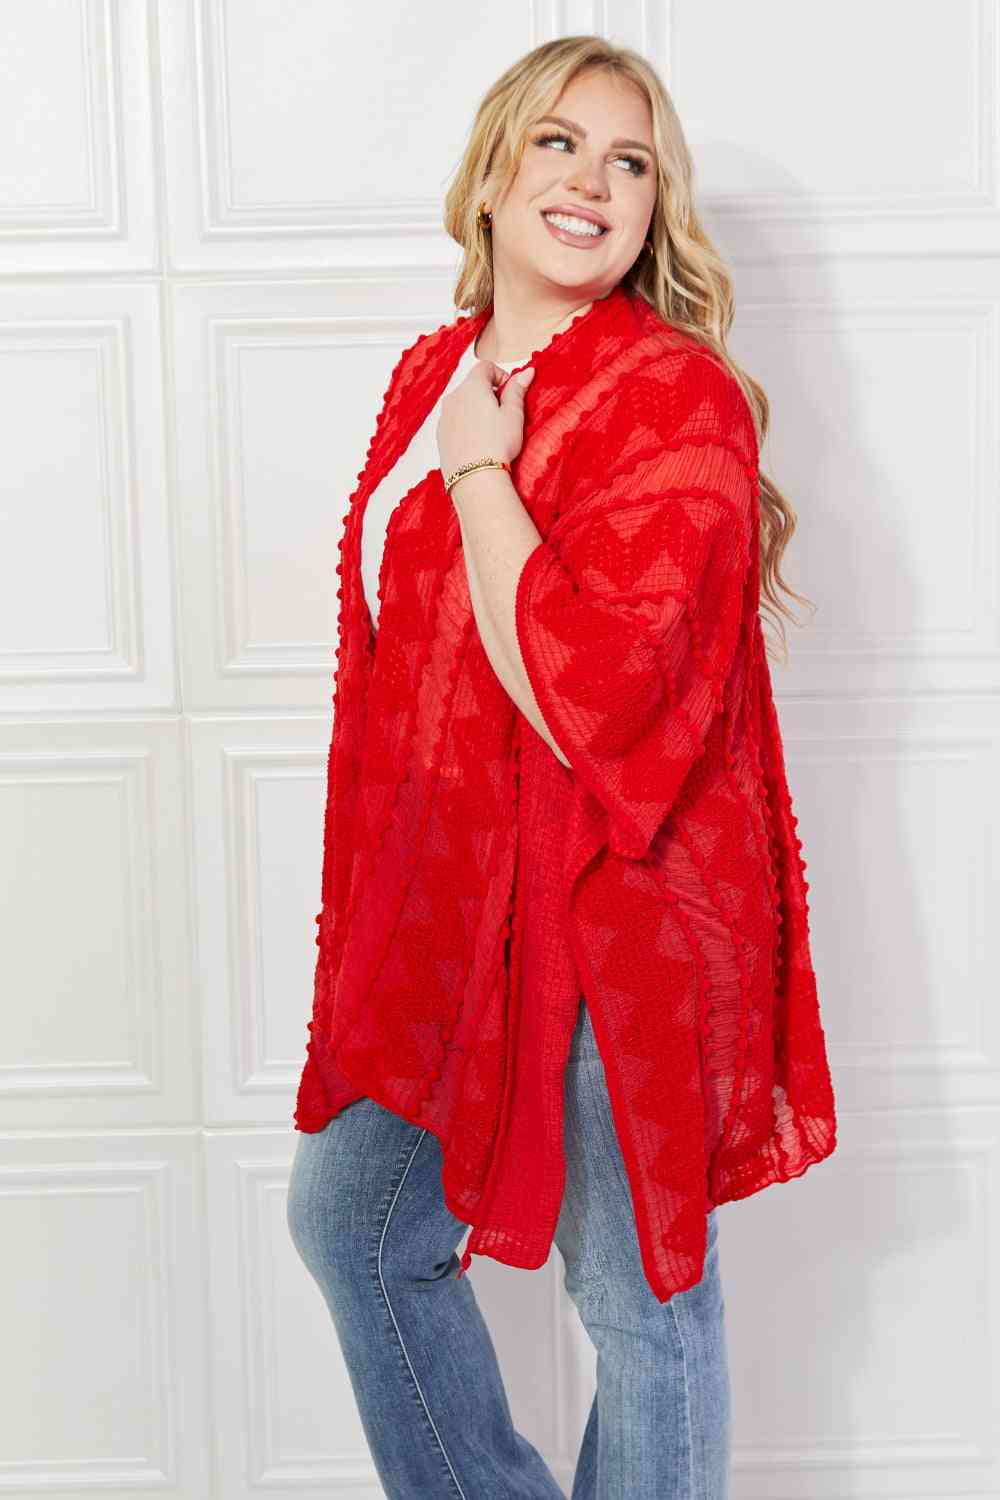 Pom-Pom Asymmetrical Poncho Cardigan in Red - Red / One Size - Women’s Clothing & Accessories - Outerwear - 4 - 2024